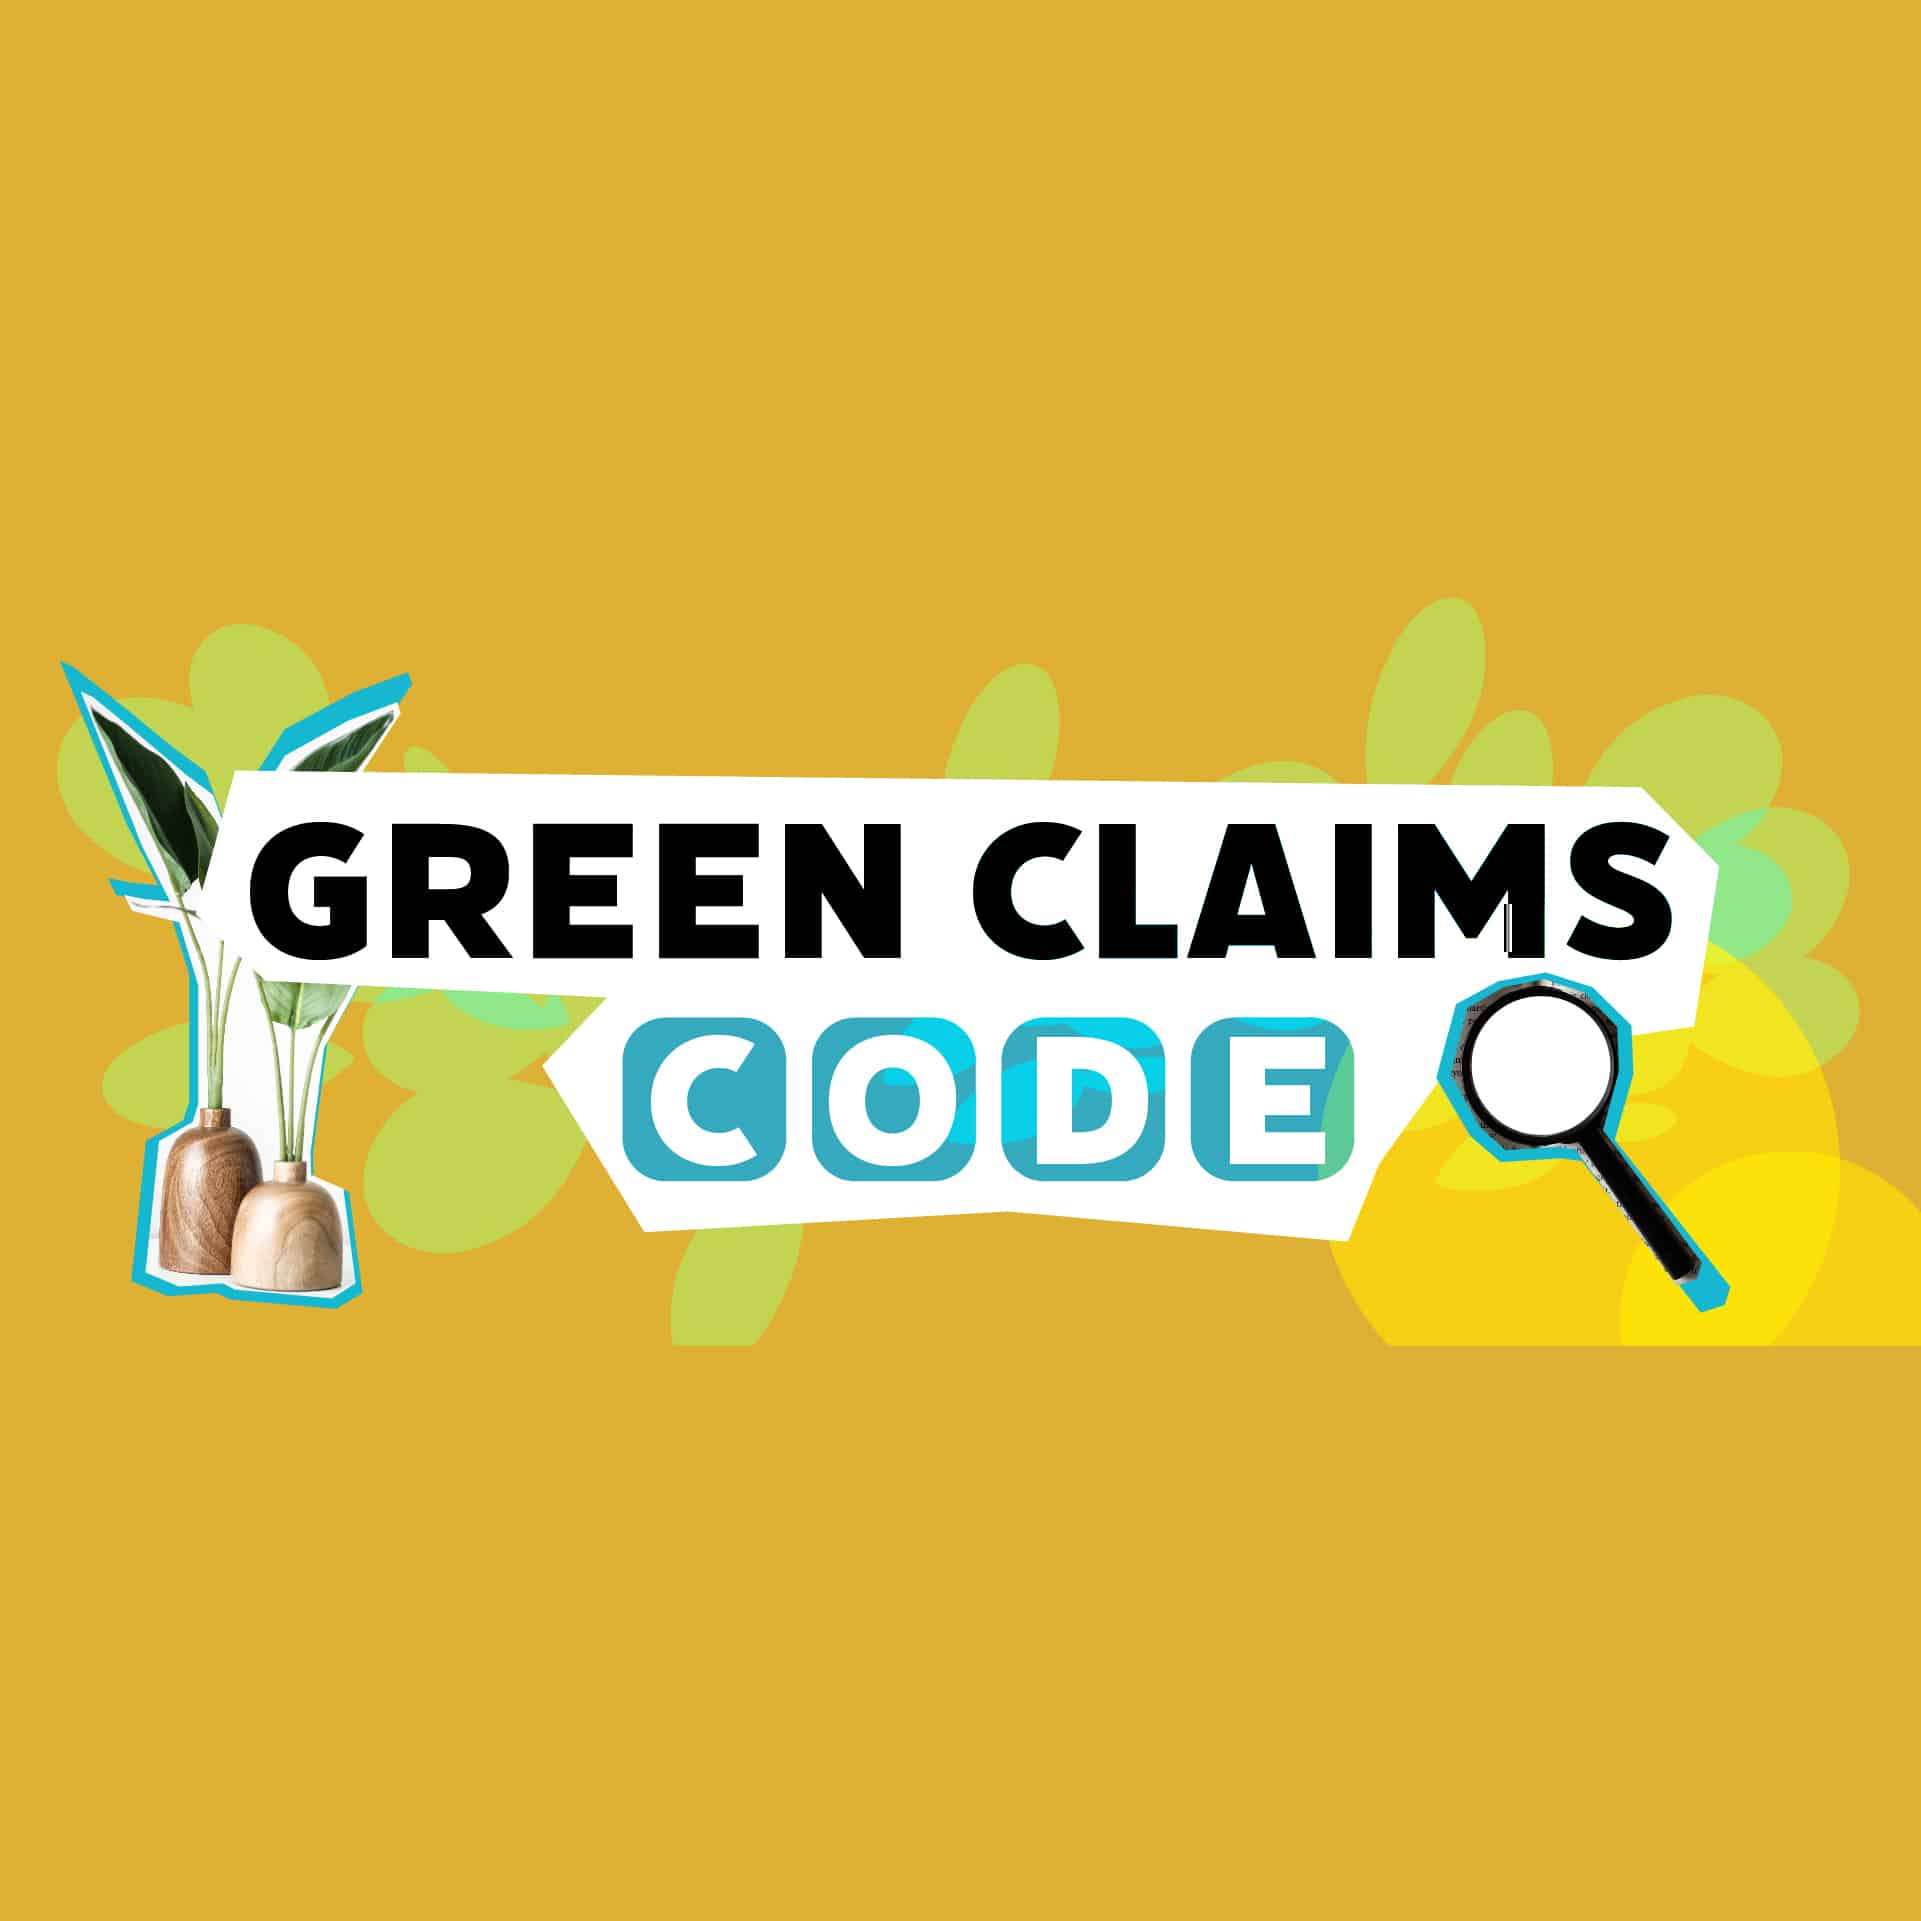 What's the Green Claims Code?